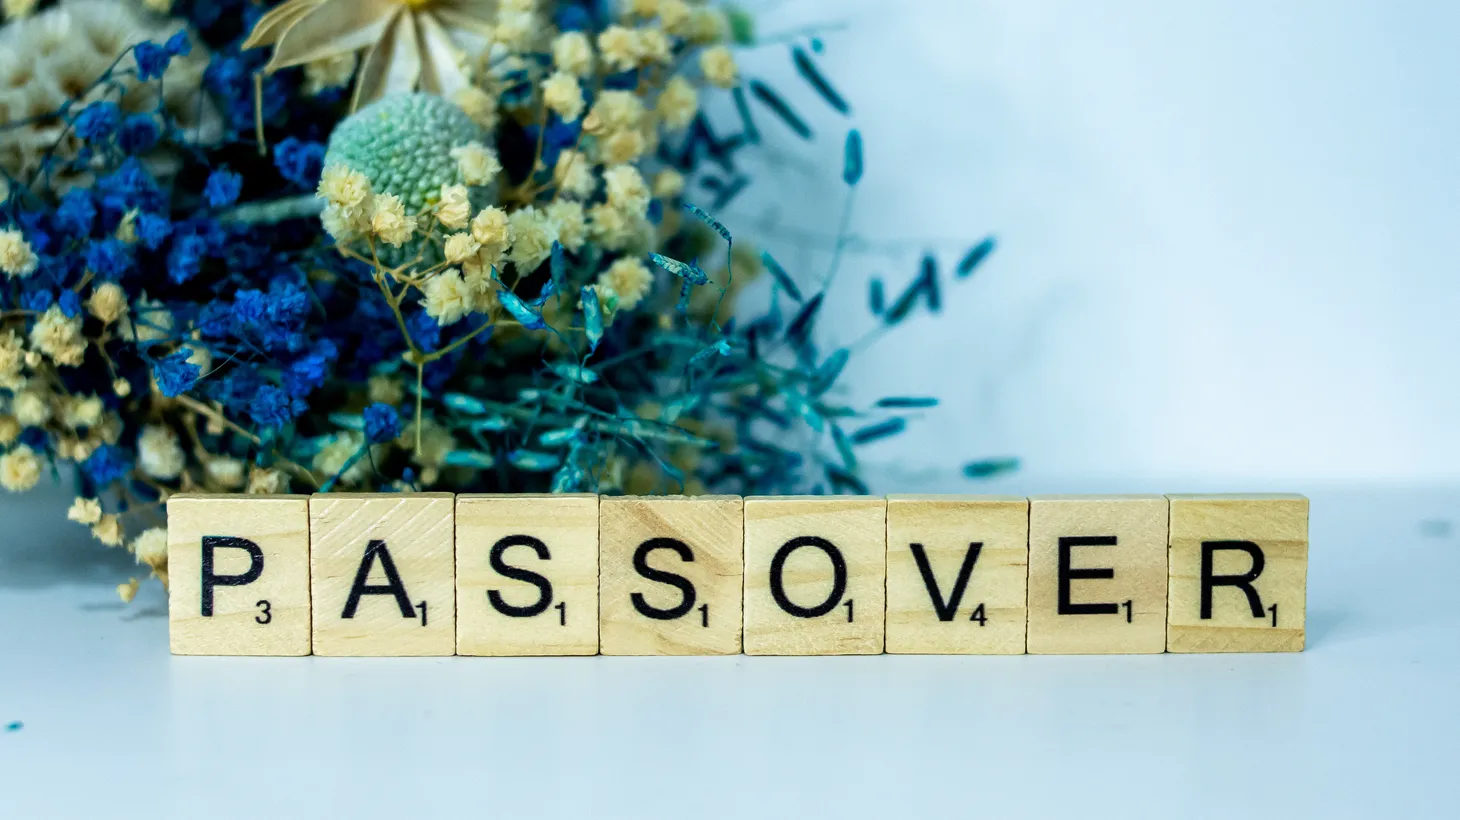 Passover is here!